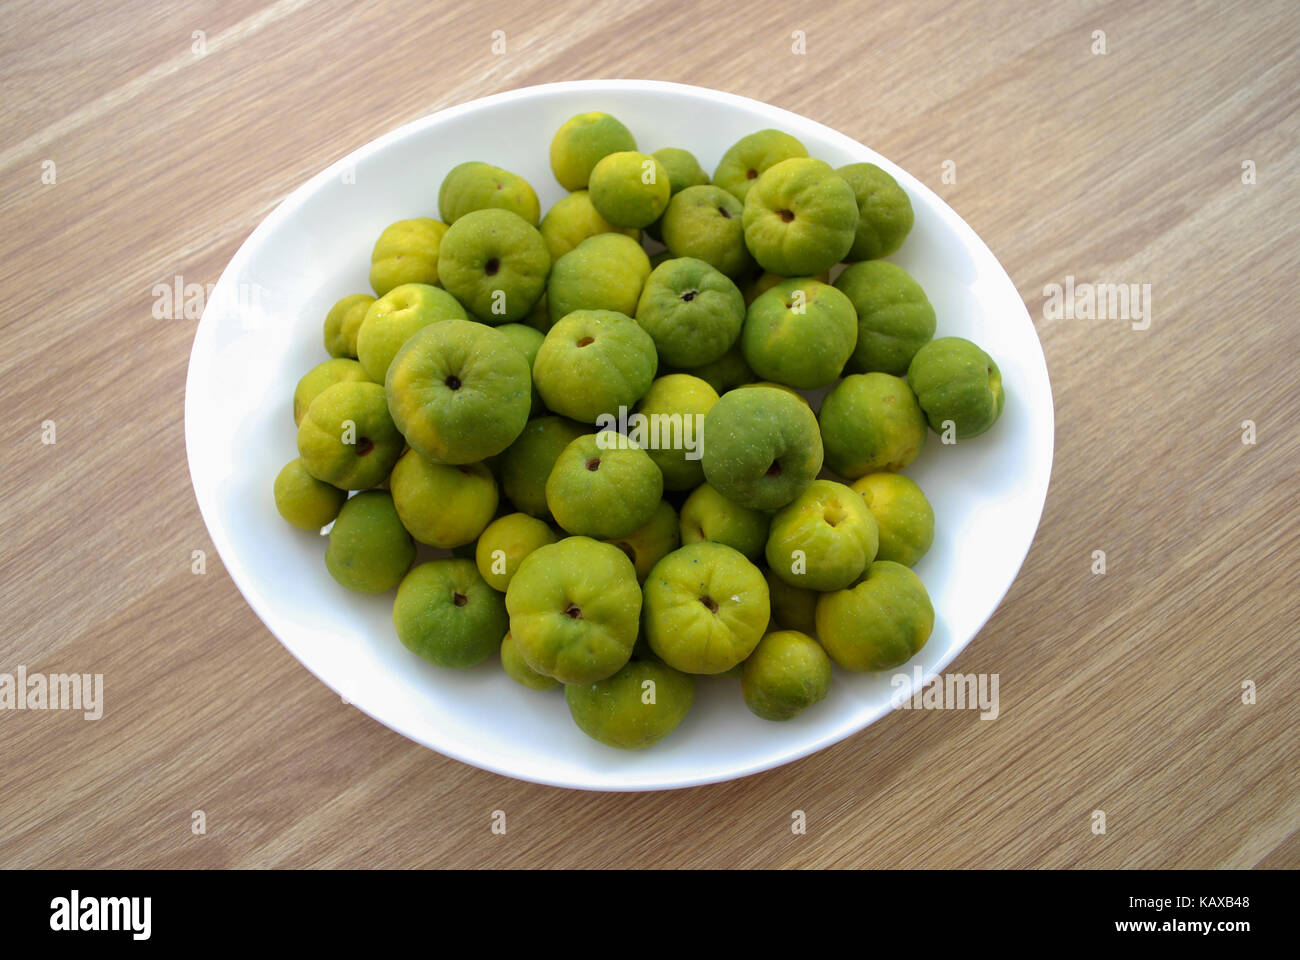 Chaenomeles japonica (known as Maule's quince) green and yellow fruits on the white plate. Wooden background. Stock Photo